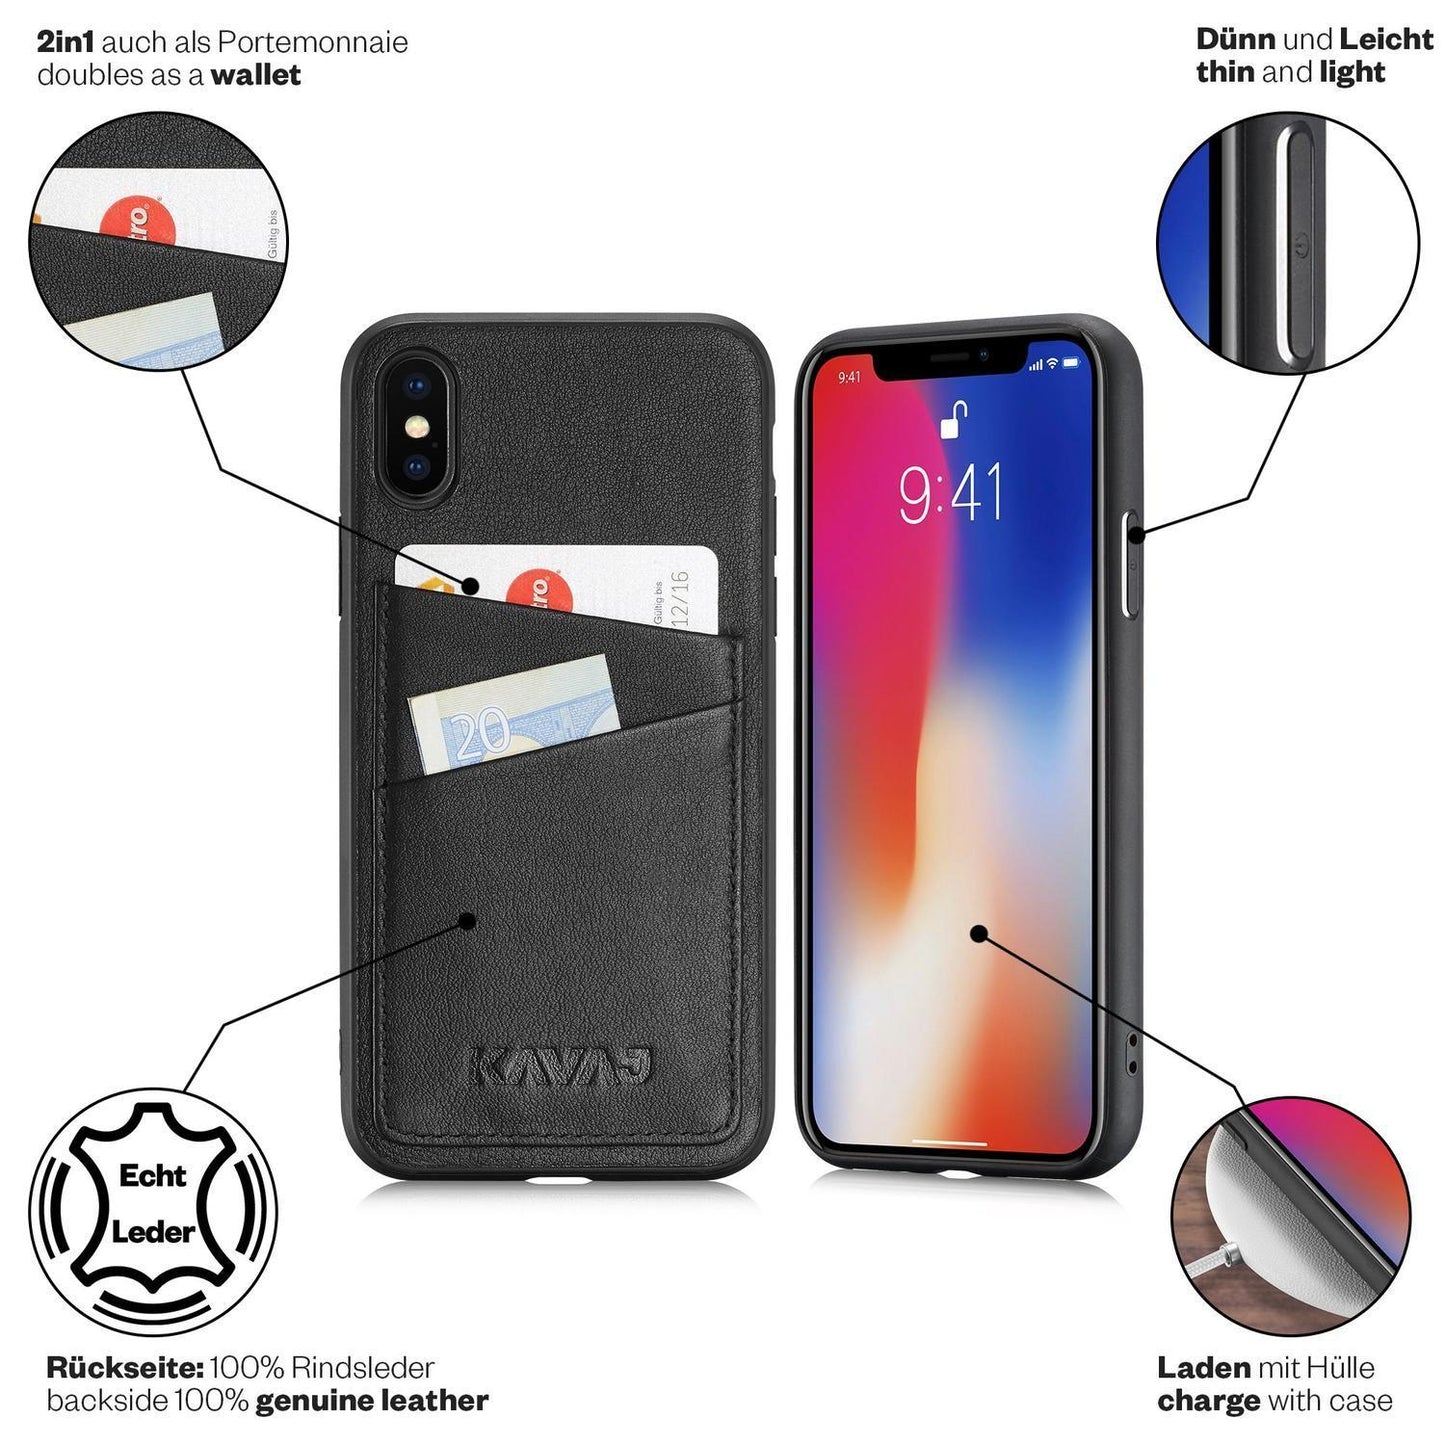 KAVAJ Case sent for Apple iPhone X/XS 5.8" Leather - Tokyo